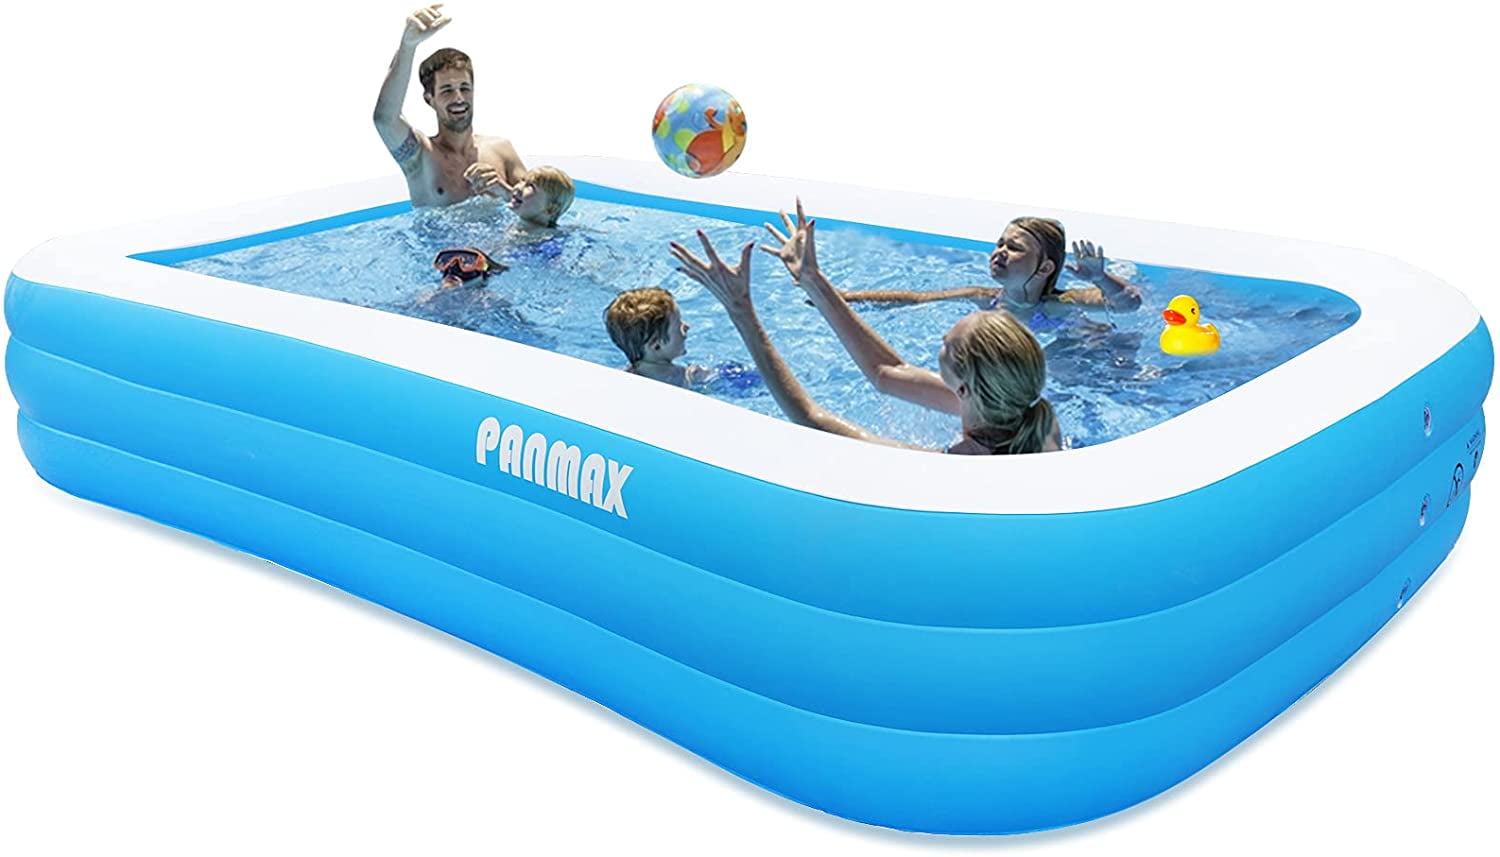 Taiker Inflatable Swimming Pools Backyard 96 x 57 x 21 in Family Lounge Pools Kiddie Pools Babies Outdoor Family Swimming Pool for Kids Toddlers Garden Adults 